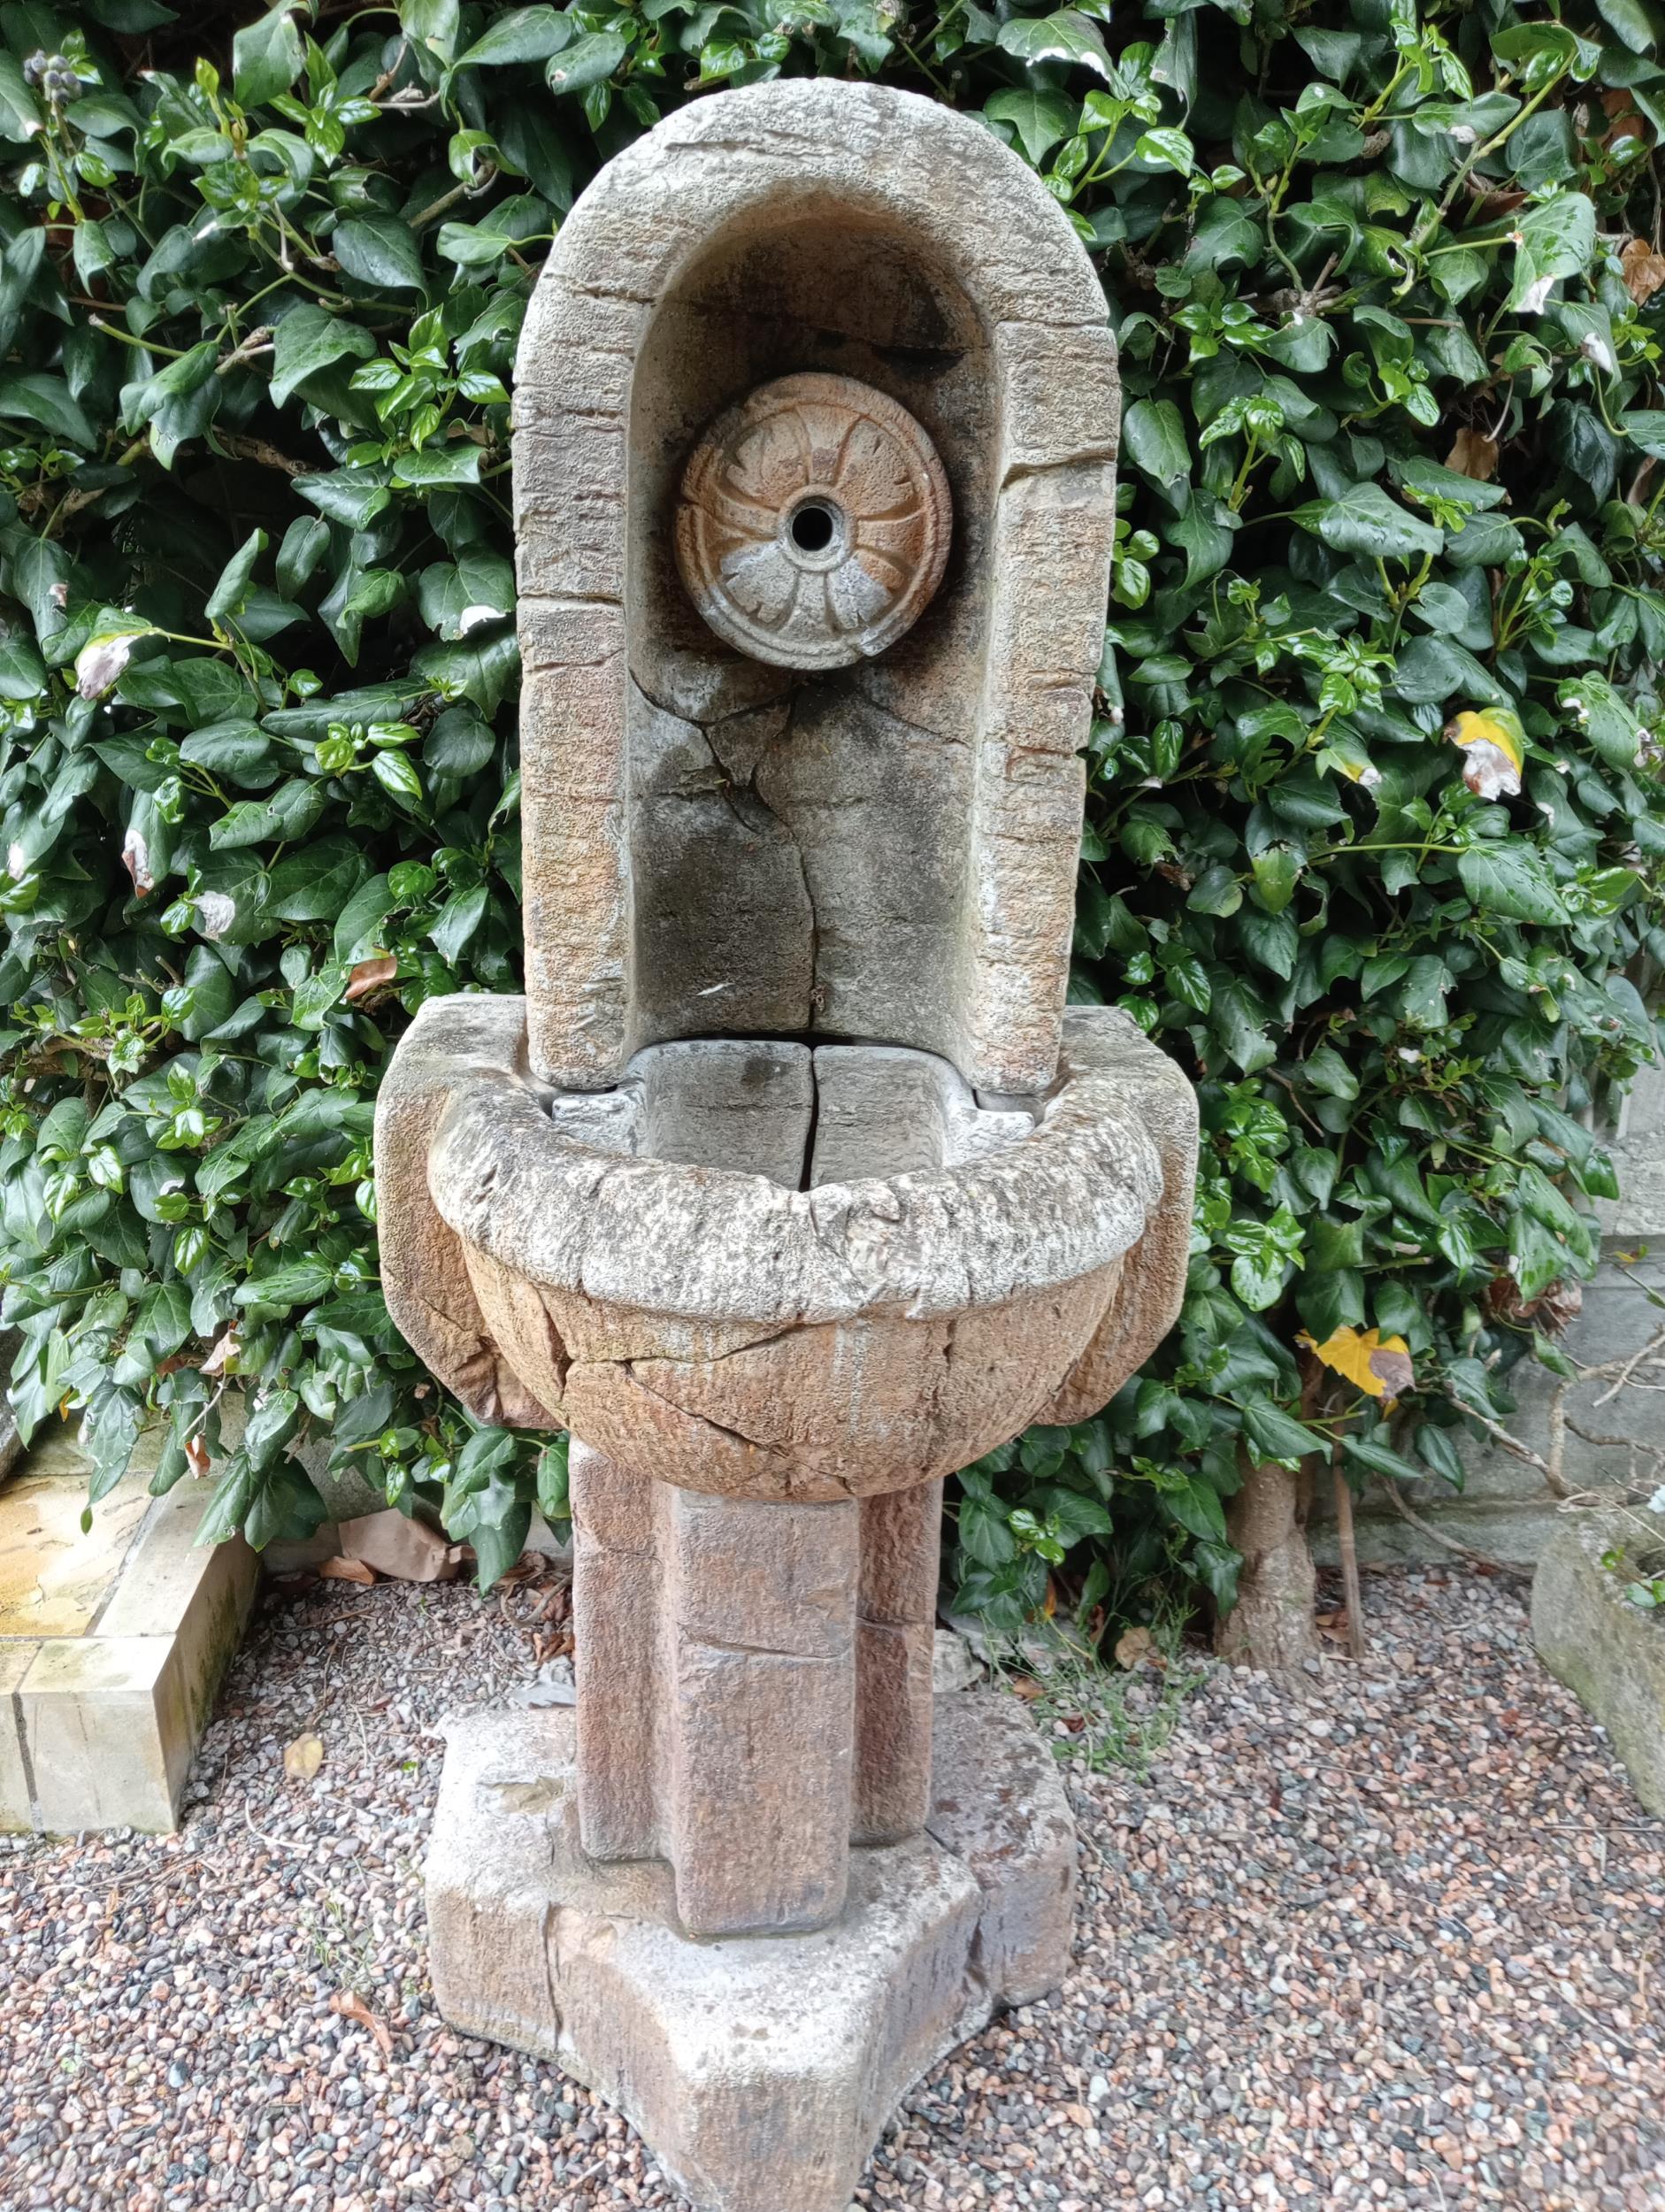 Stone Henri studio water fountain {H 145cm x W 60cm x D 50cm}. (NOT AVAILABLE TO VIEW IN PERSON)